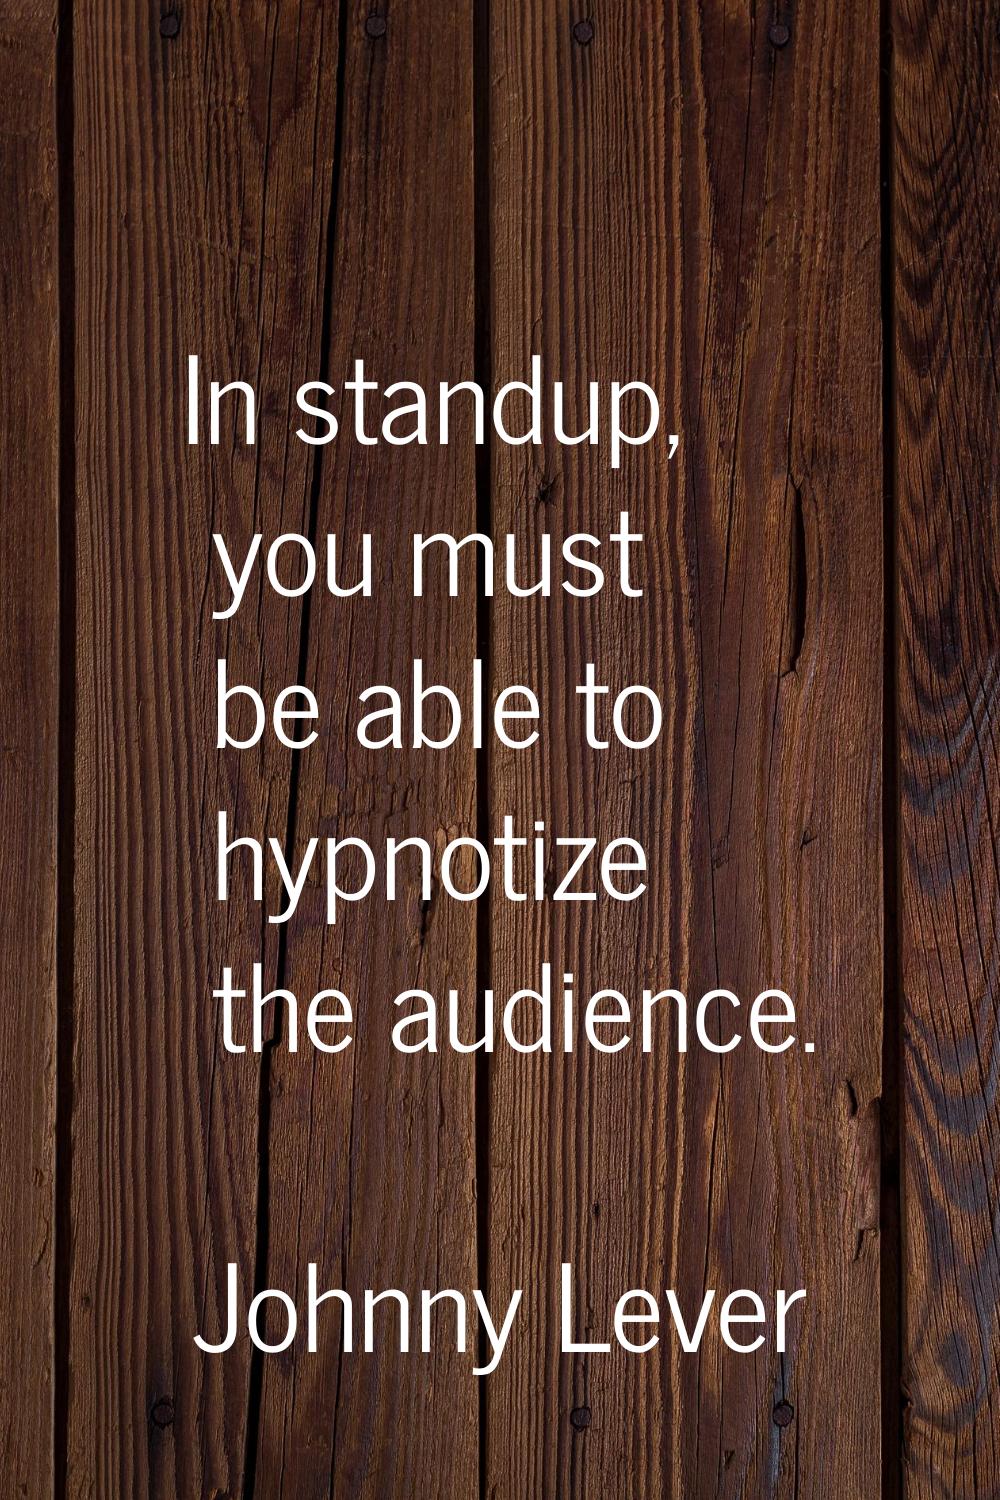 In standup, you must be able to hypnotize the audience.